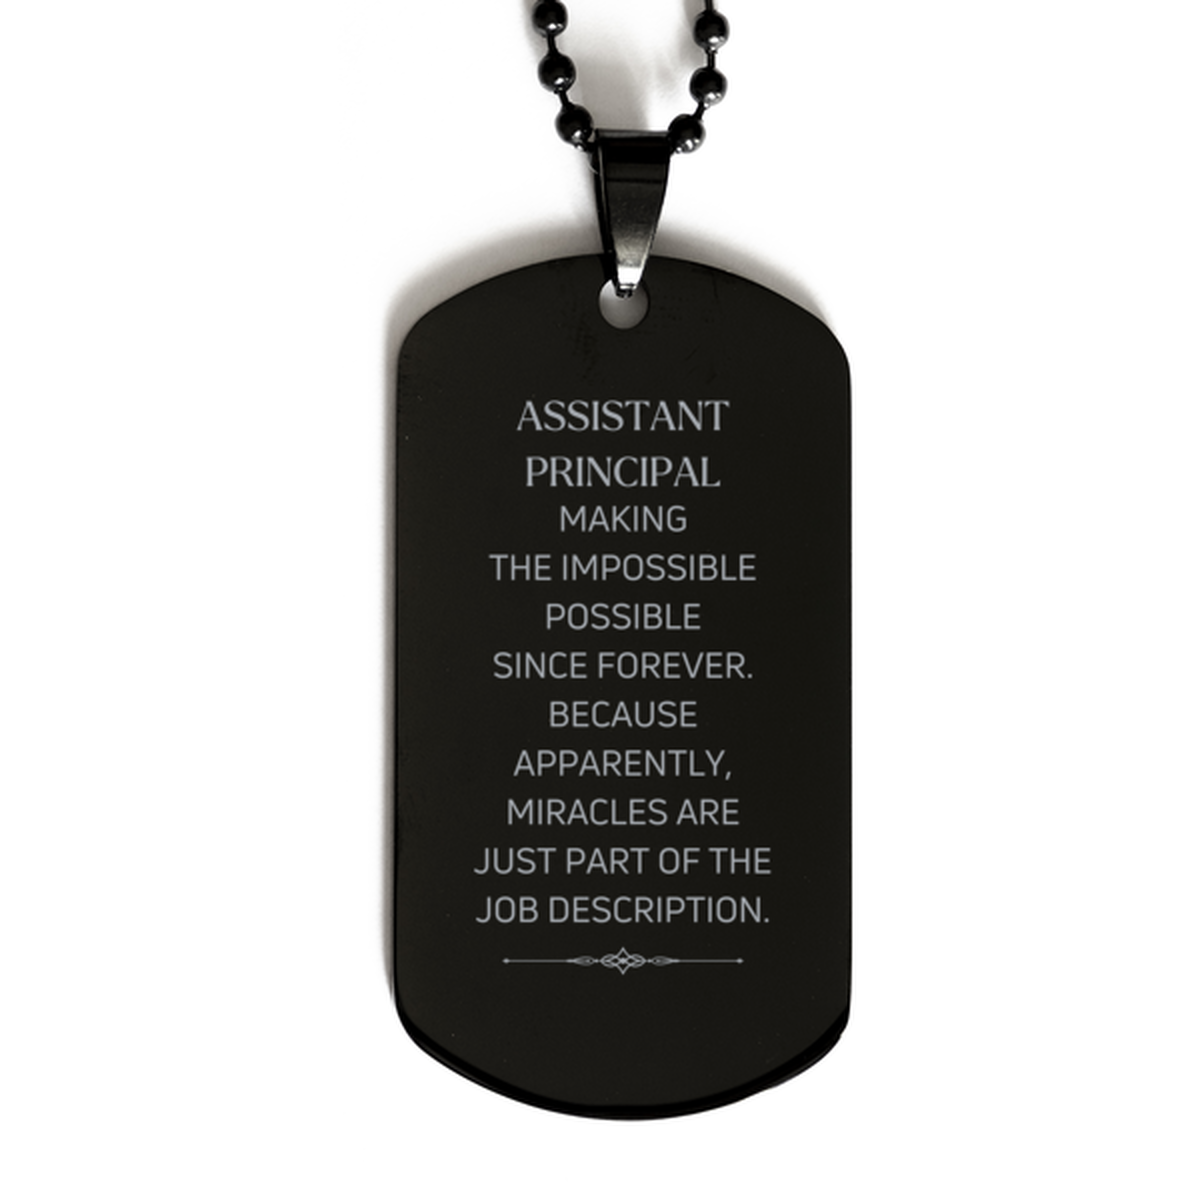 Funny Assistant Principal Gifts, Miracles are just part of the job description, Inspirational Birthday Black Dog Tag For Assistant Principal, Men, Women, Coworkers, Friends, Boss